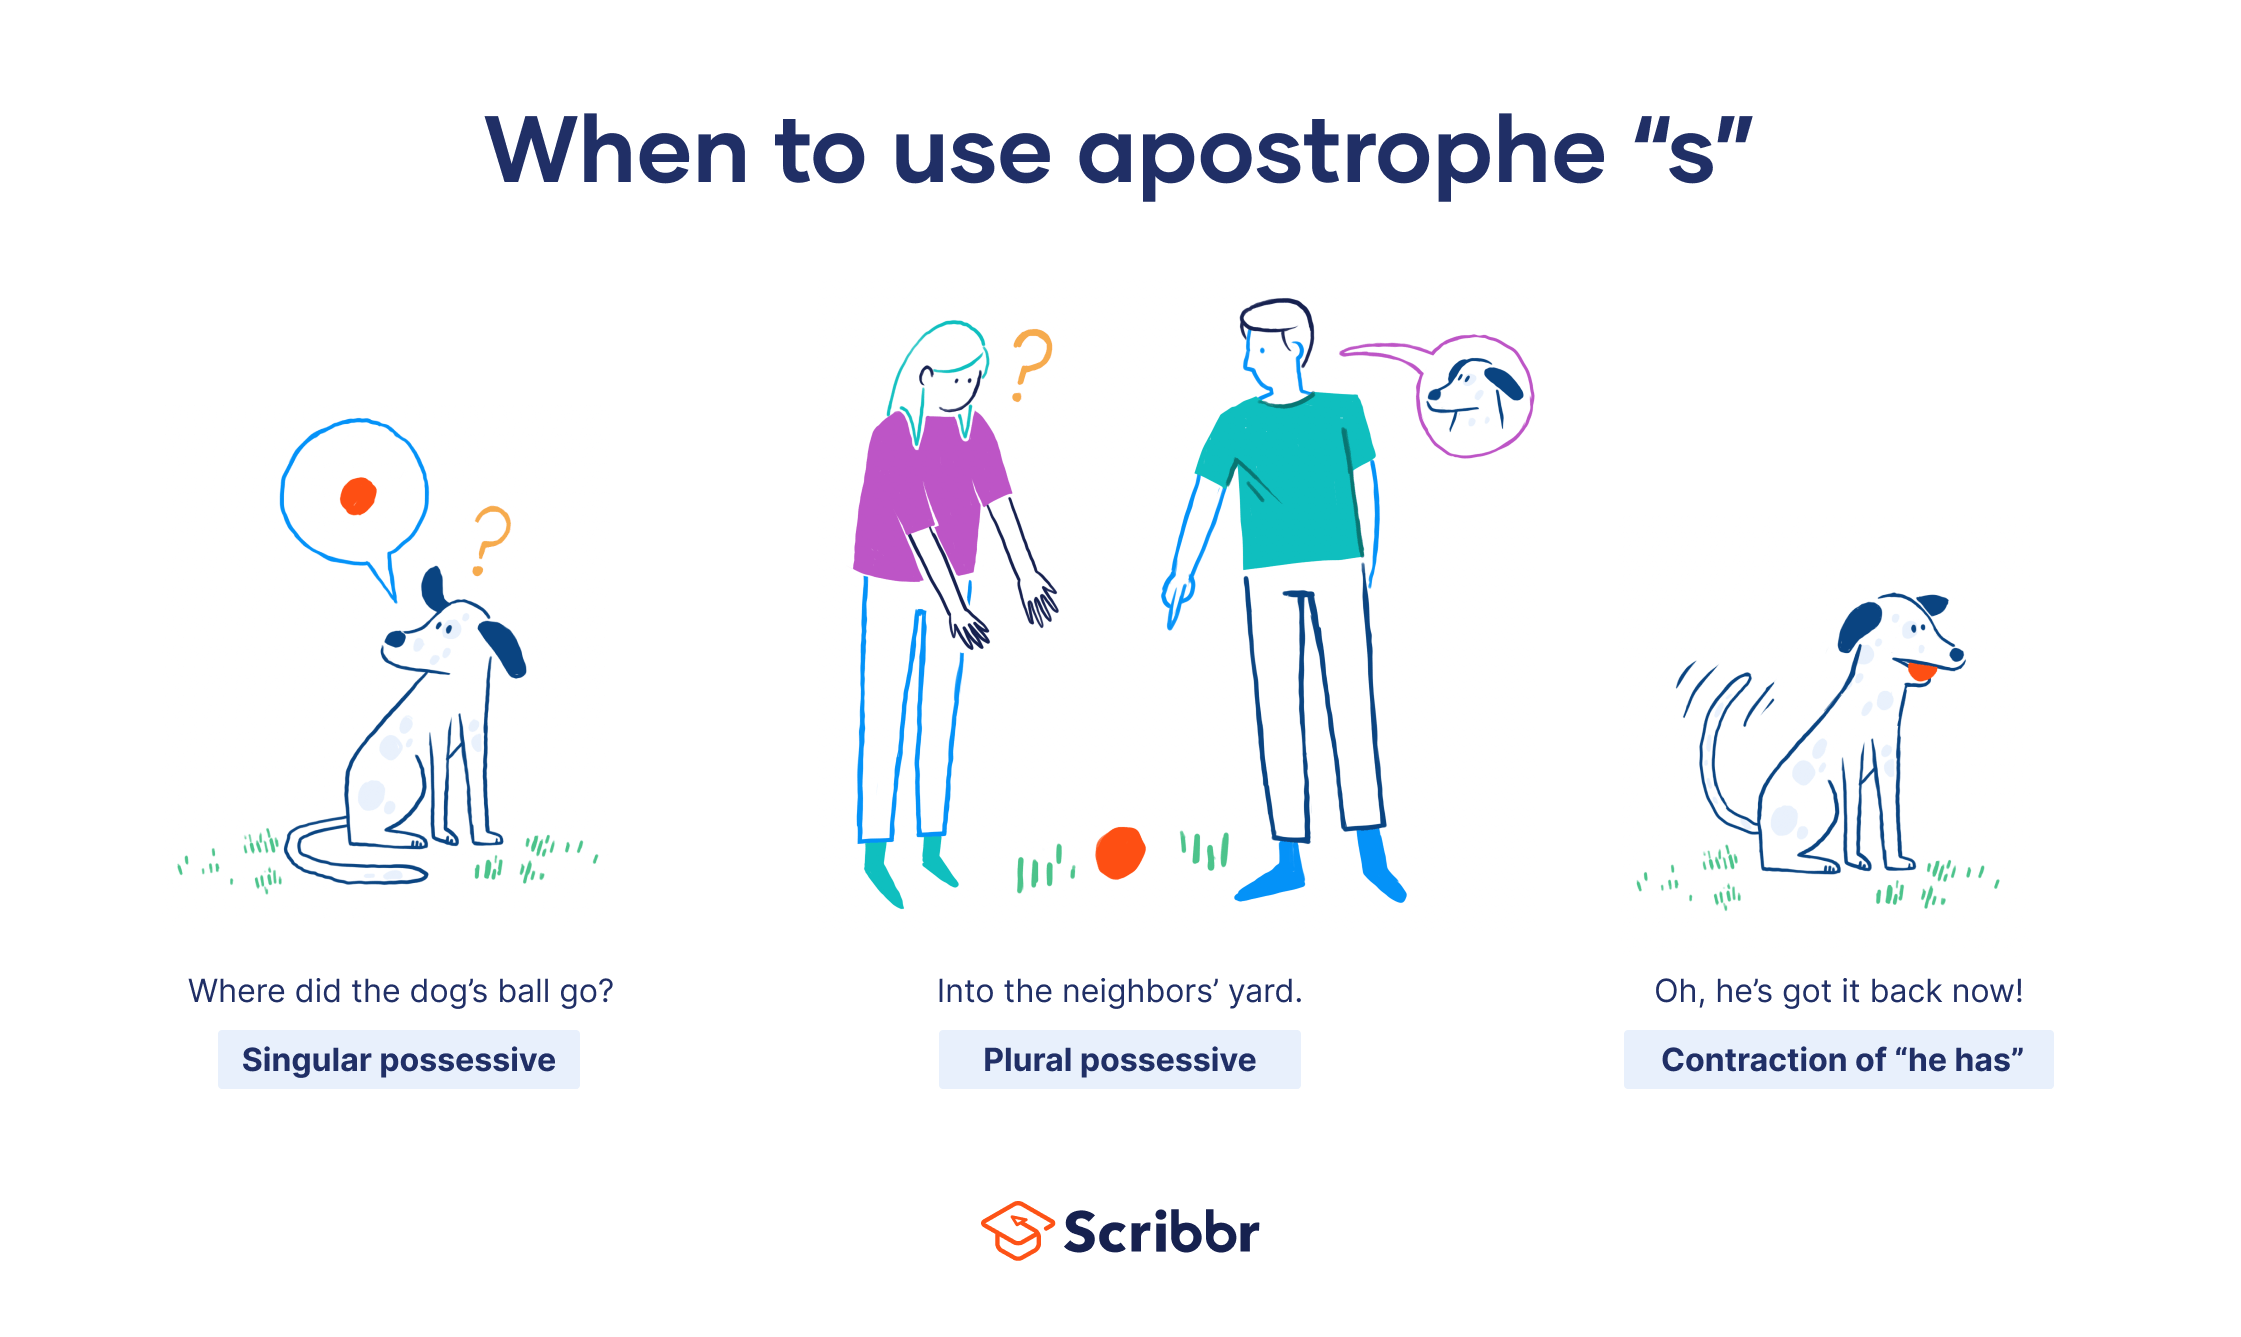 When to use apostrophe “s”